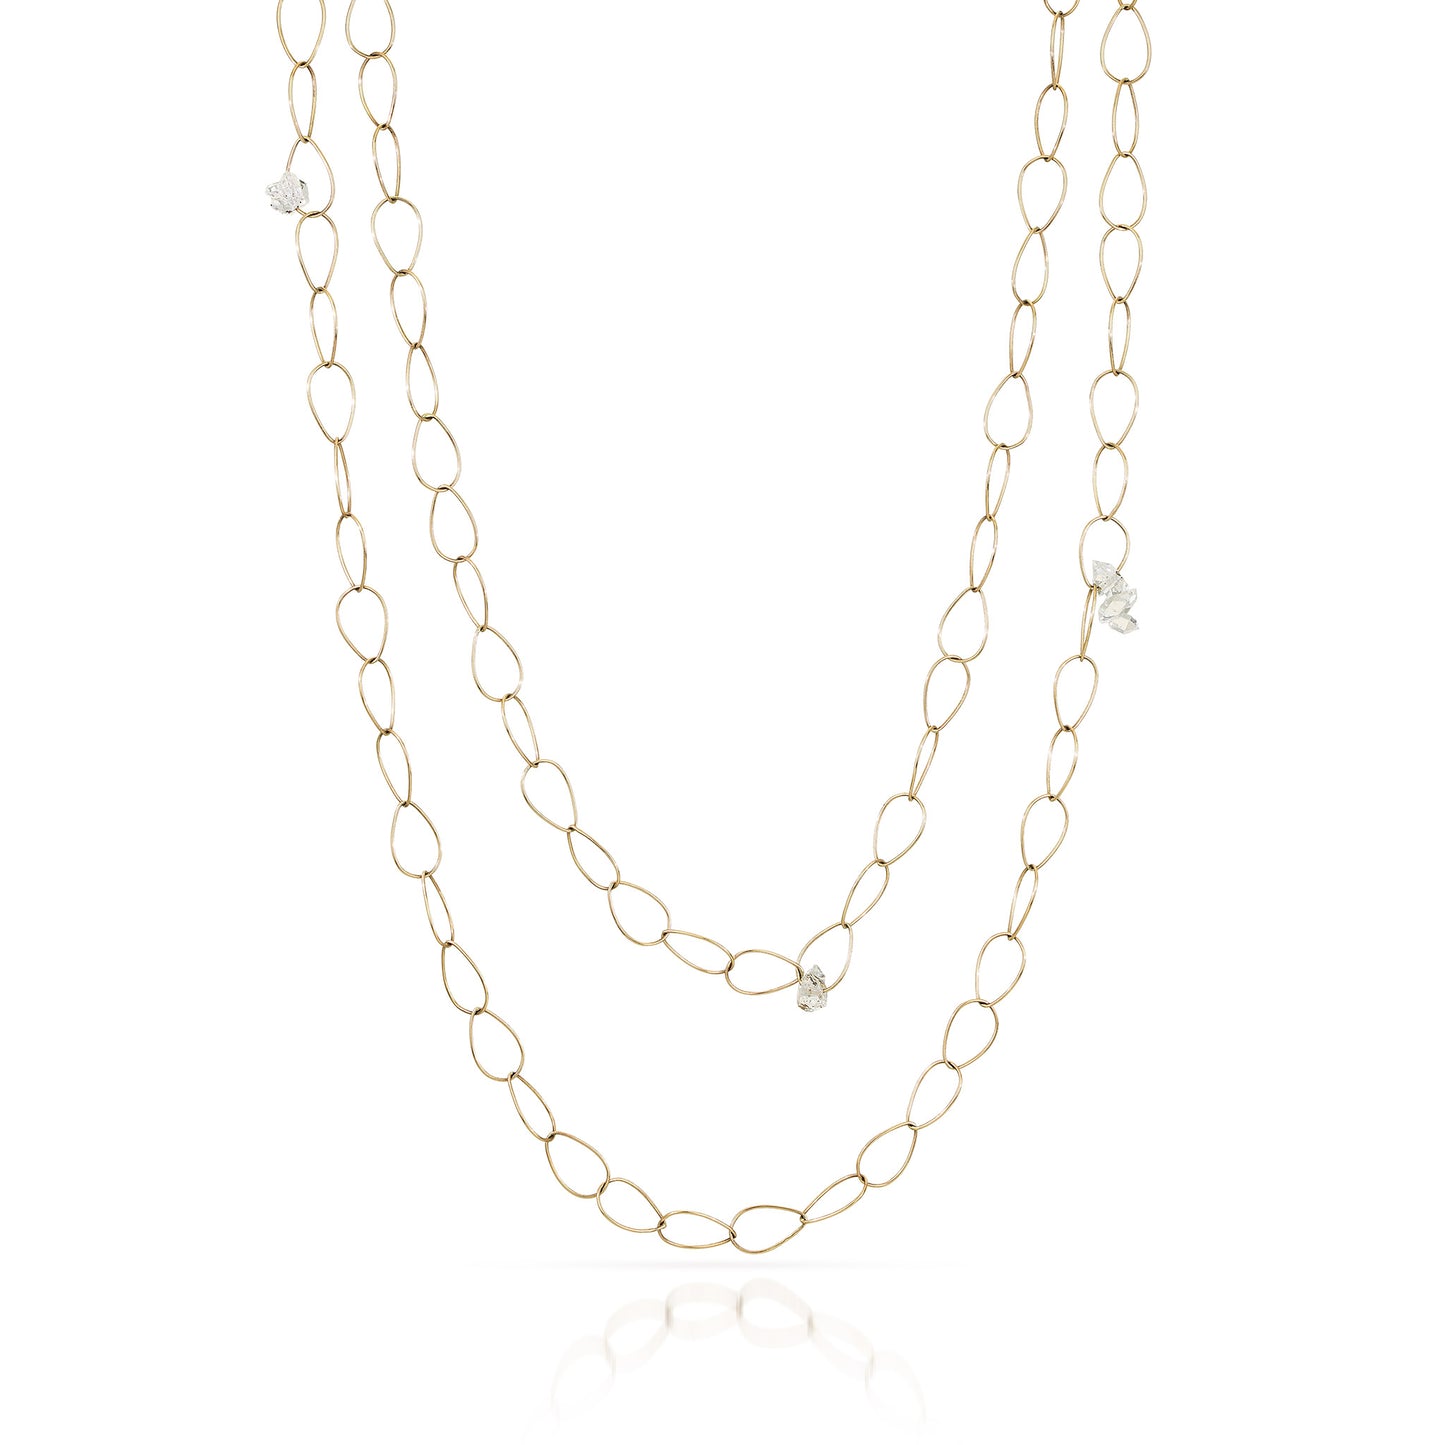 Delicate Gold Pear Link Chain Necklace with Herkimers